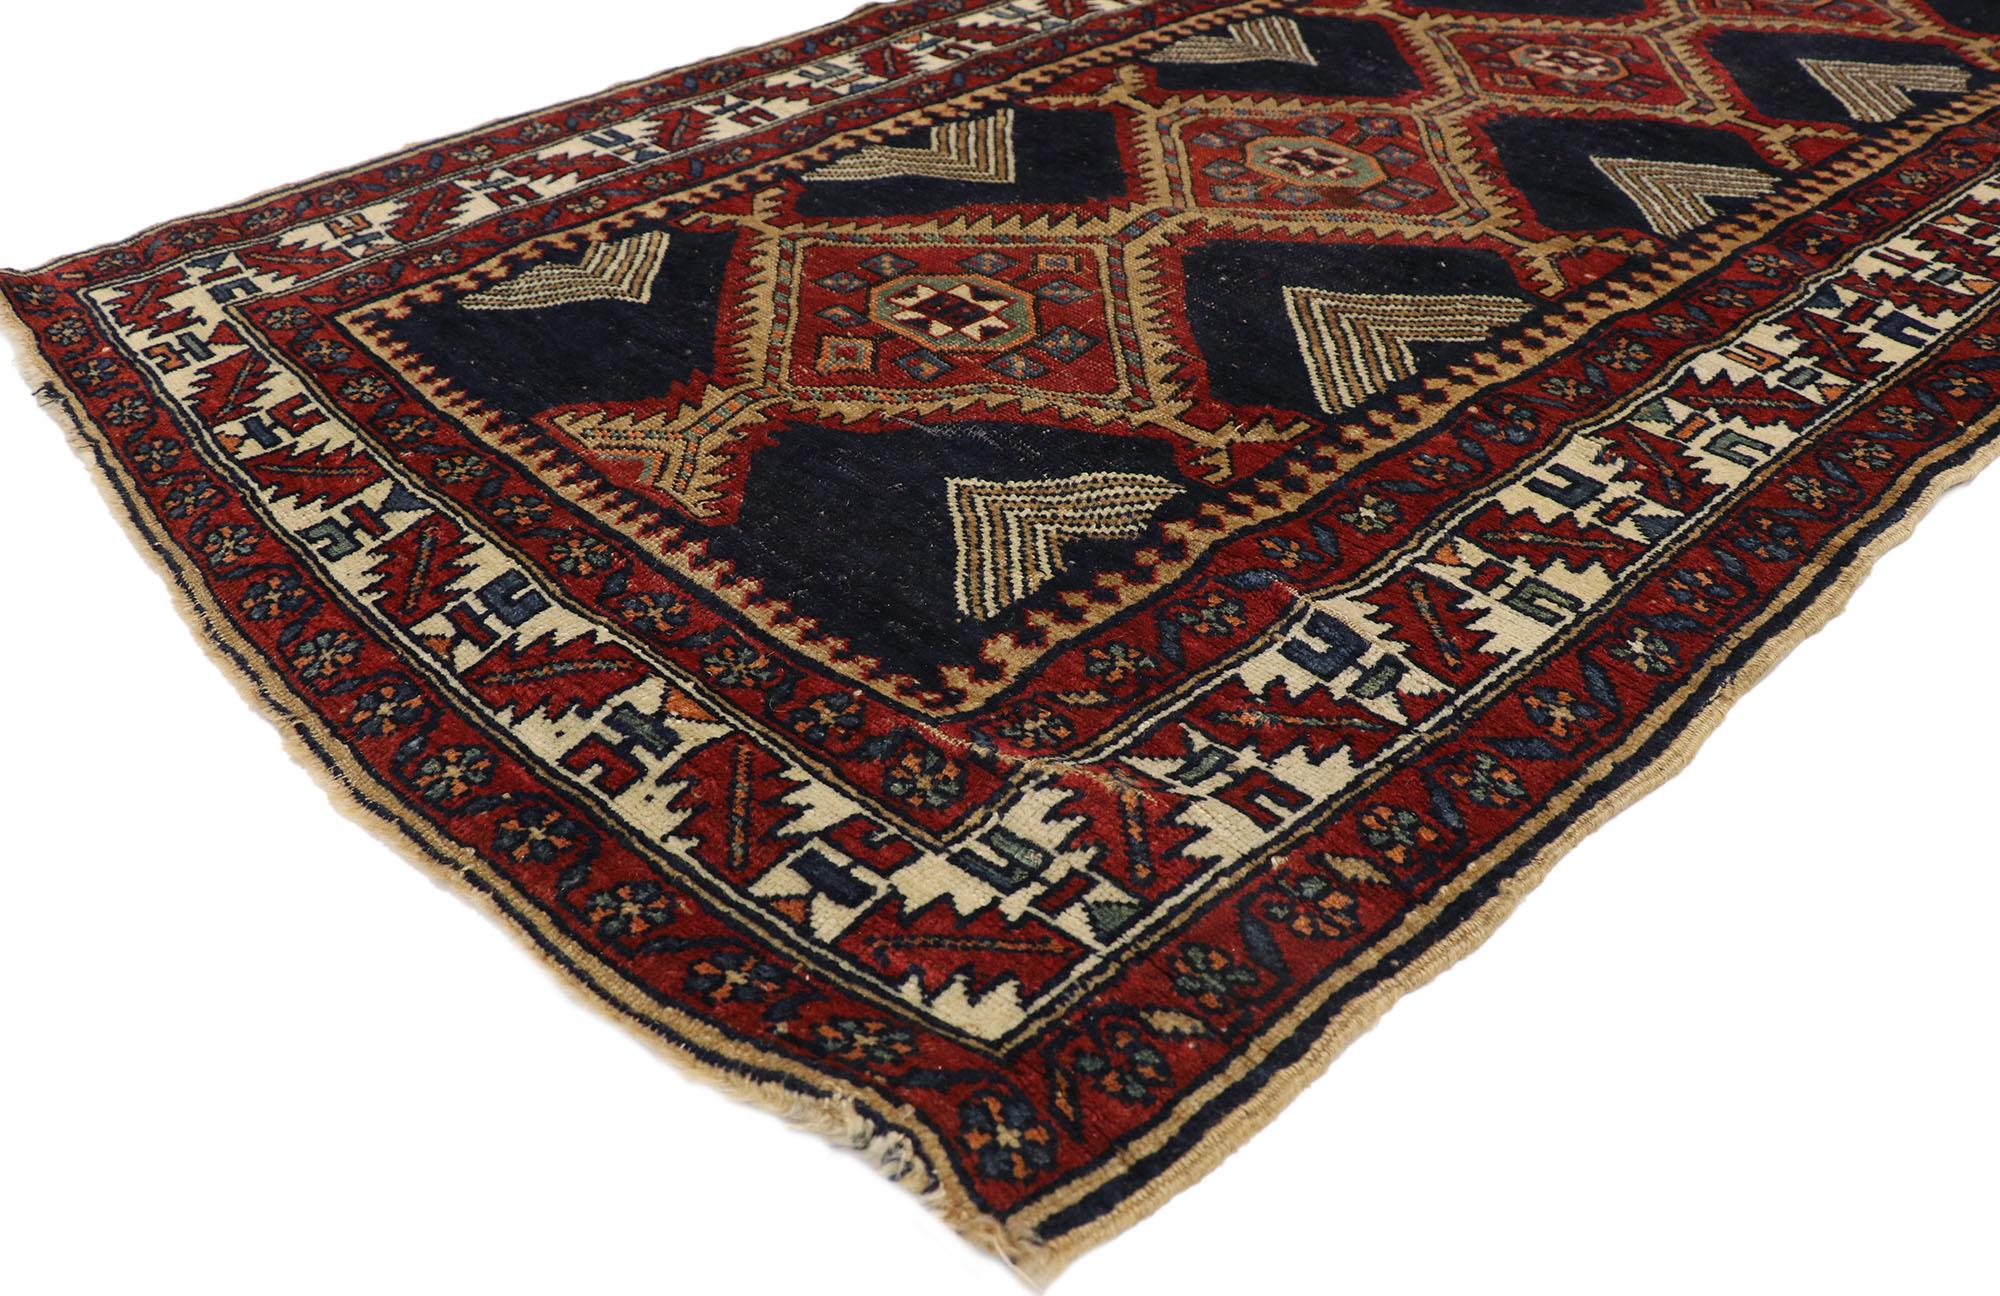 77396 Vintage Persian Heriz runner with Mid-Century Modern style. This hand knotted wool vintage Persian Heriz runner features a center column of diamond-shaped pole medallions spread across an abrashed ink blue field. Each medallion contains a